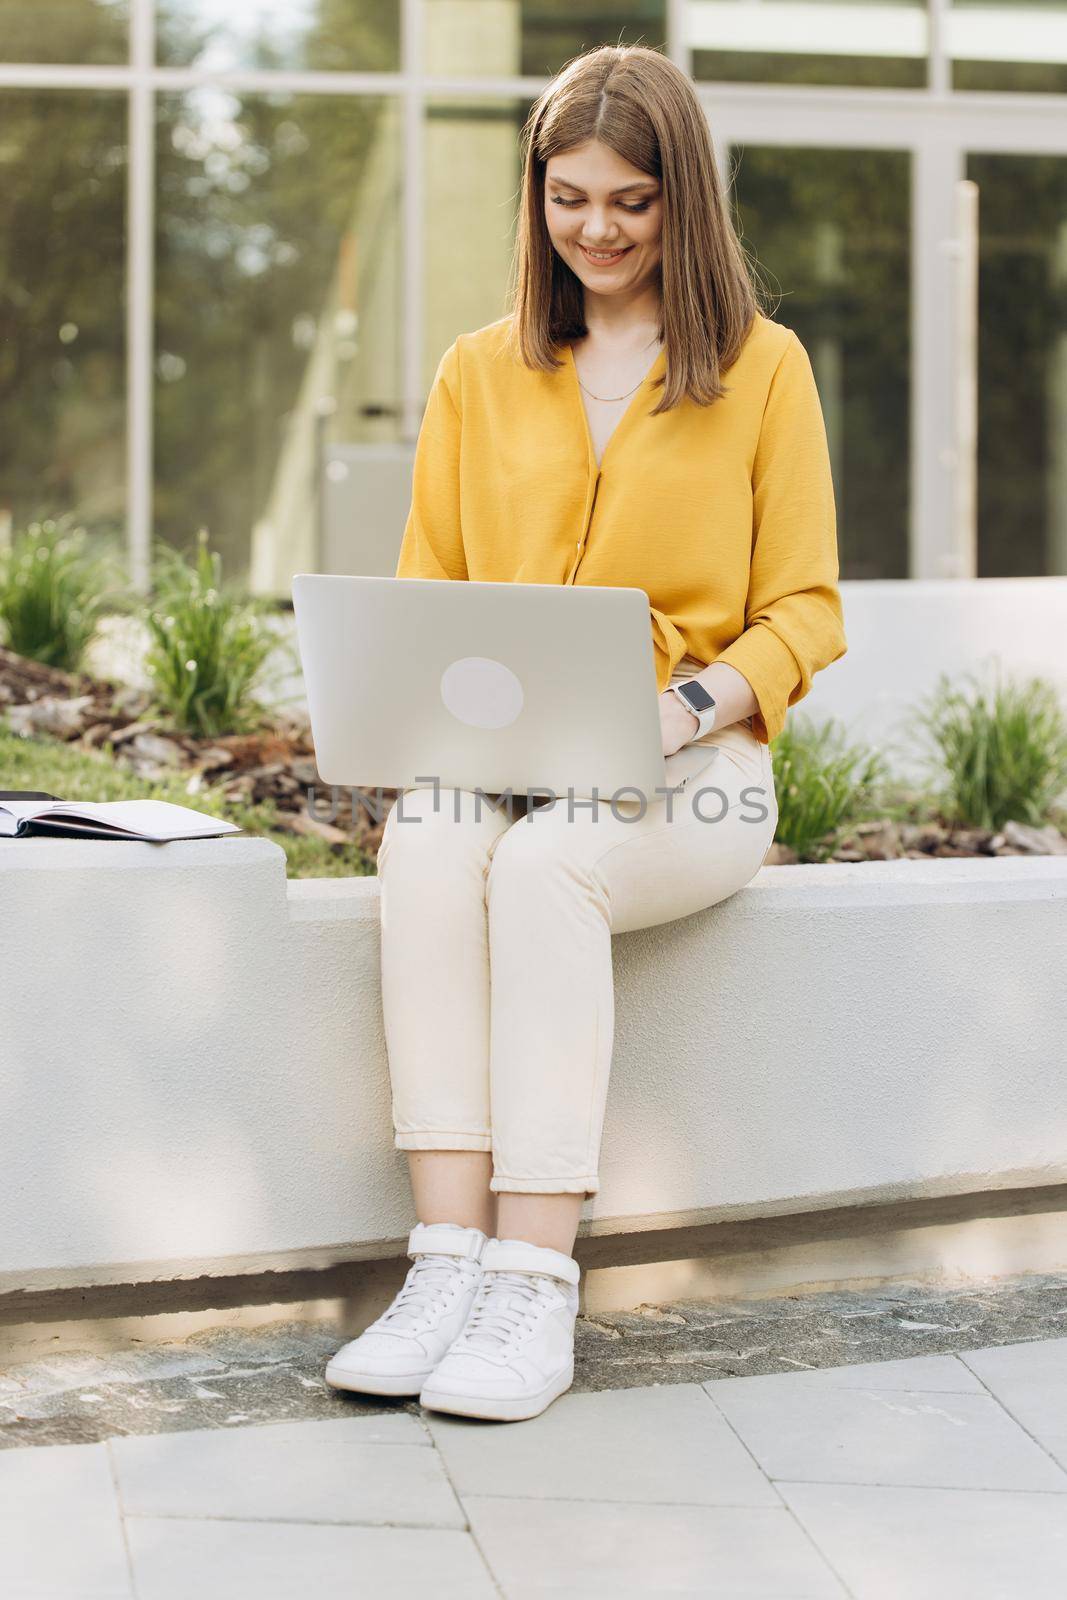 Focused business woman entrepreneur typing on laptop doing research. Female professional girl using computer sitting outside office. Busy worker freelancer working on modern tech notebook device by uflypro